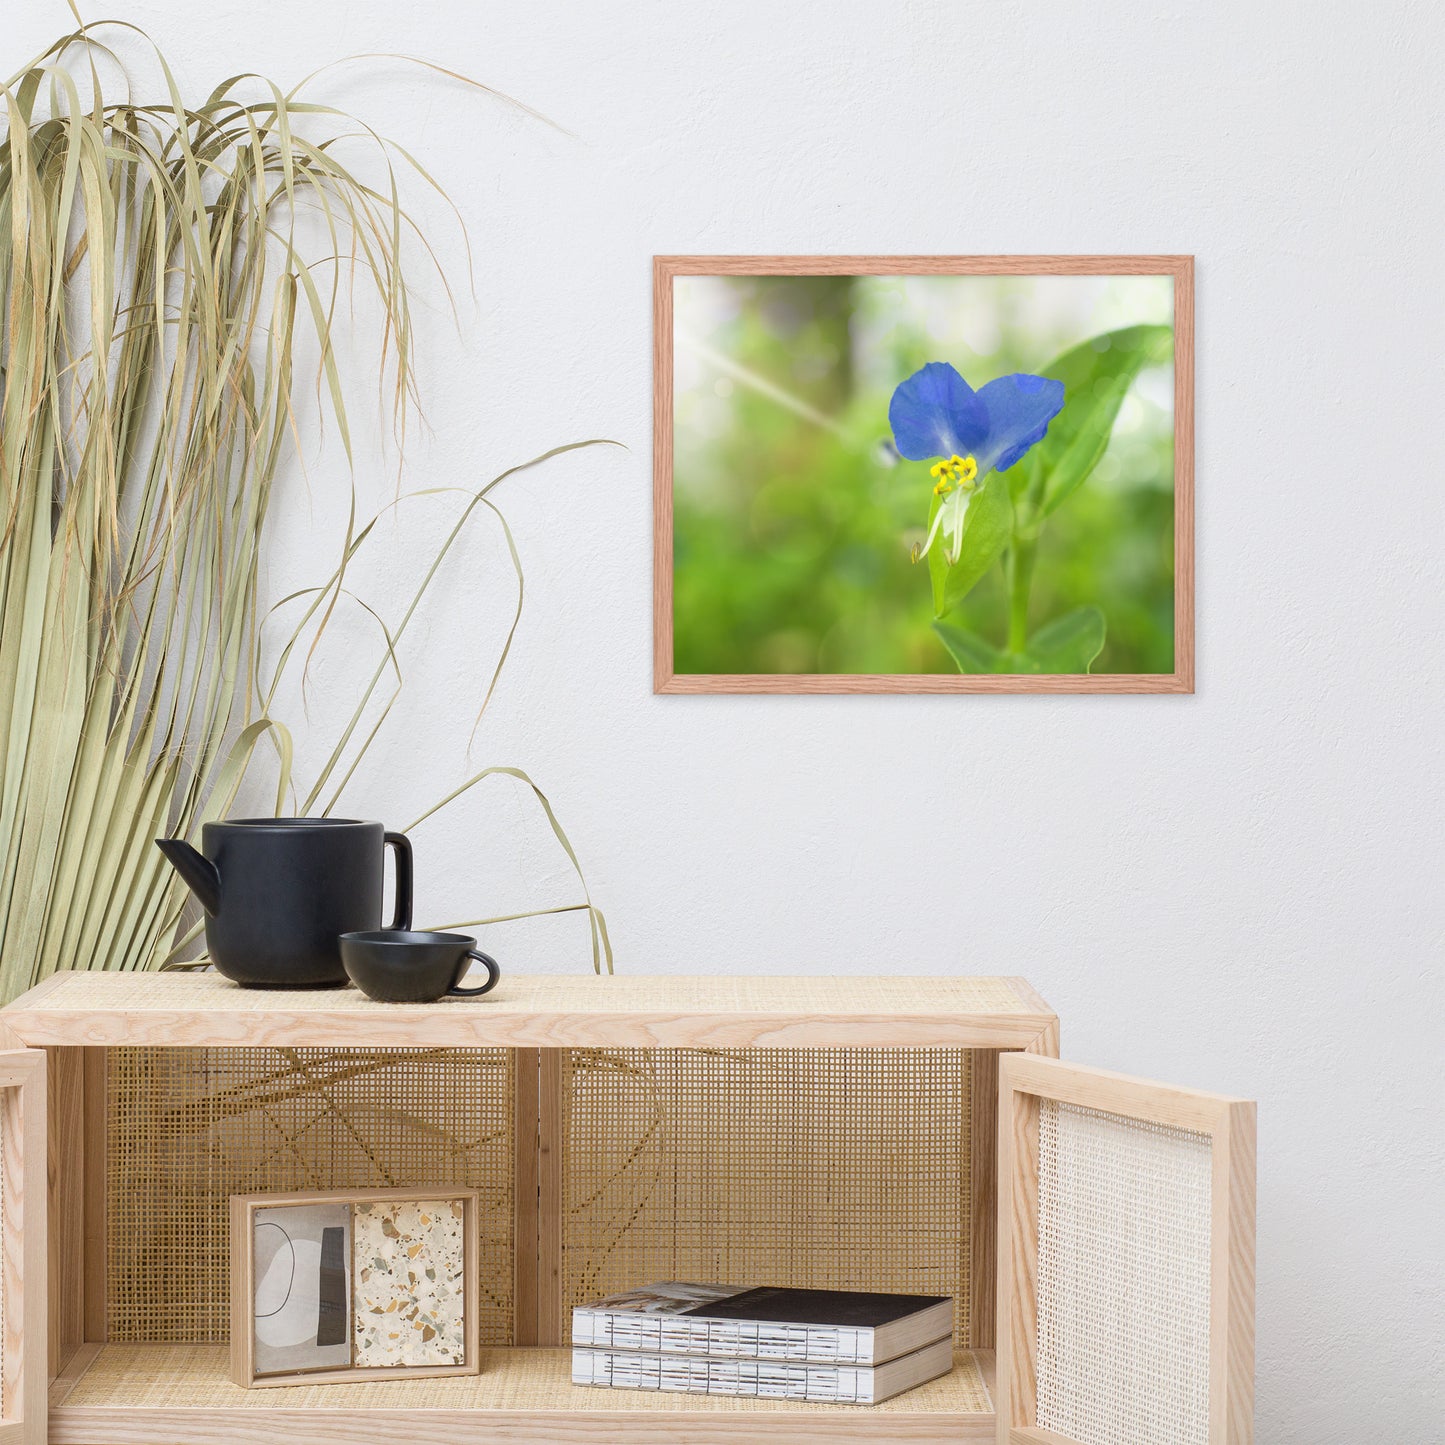 Colourful Prints For Kitchen: Asiatic Dayflower - Floral / Botanical / Nature Photo Framed Wall Art Print - Artwork - Modern Wall Decor